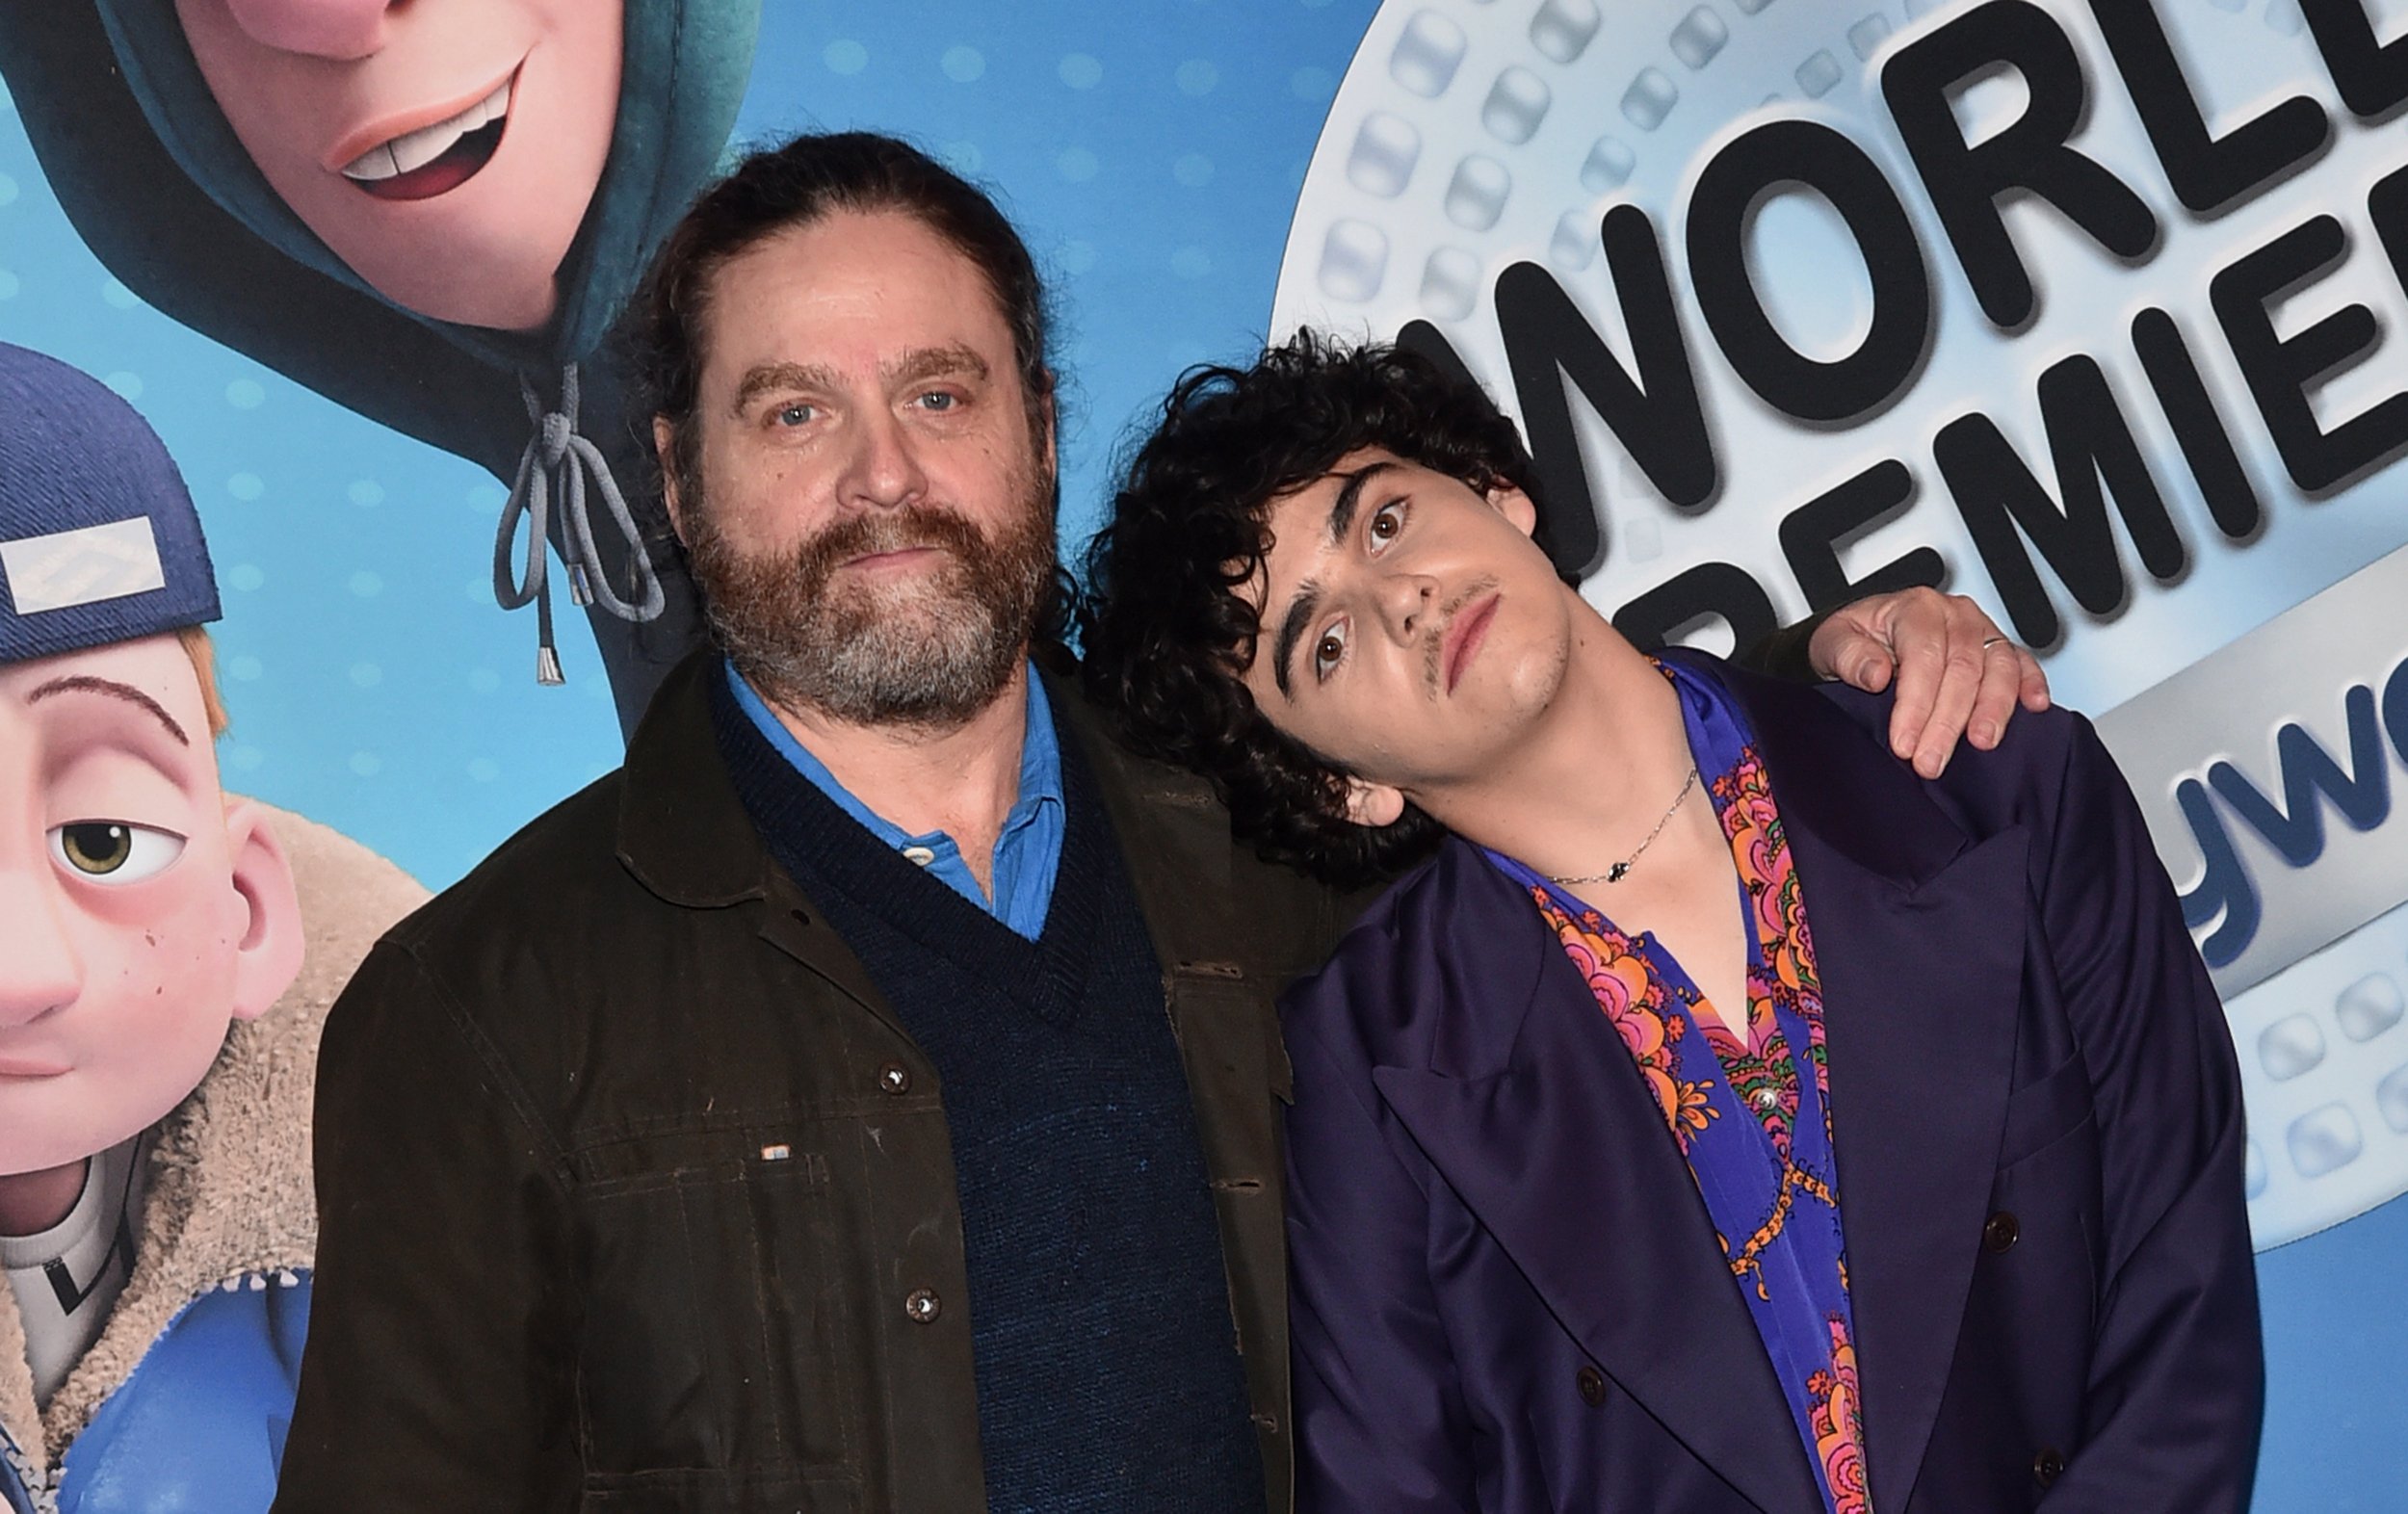 Zach Galifianakis and Jack Dylan Baker at Ron's Gone Wrong premiere.JPG